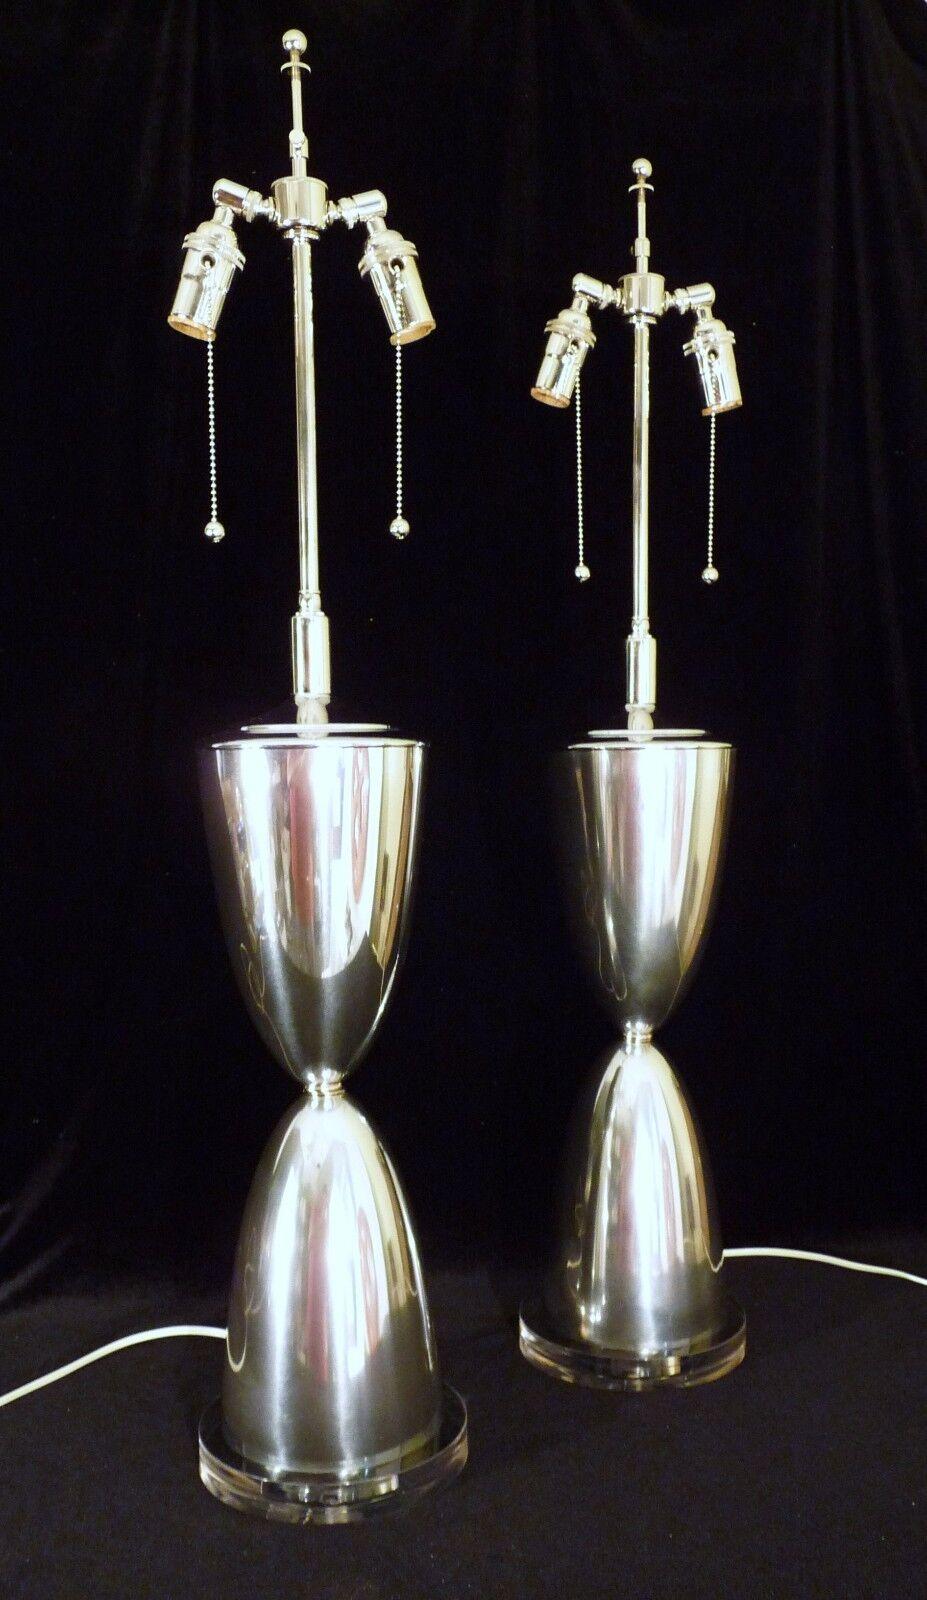 For your consideration are these matched pair of mid century modern parabolic form moderne retro atomic space age Eames Era Googie polished aluminum lucite based table lamps lights. In excellent vintage condition with new wiring and acrylic base,